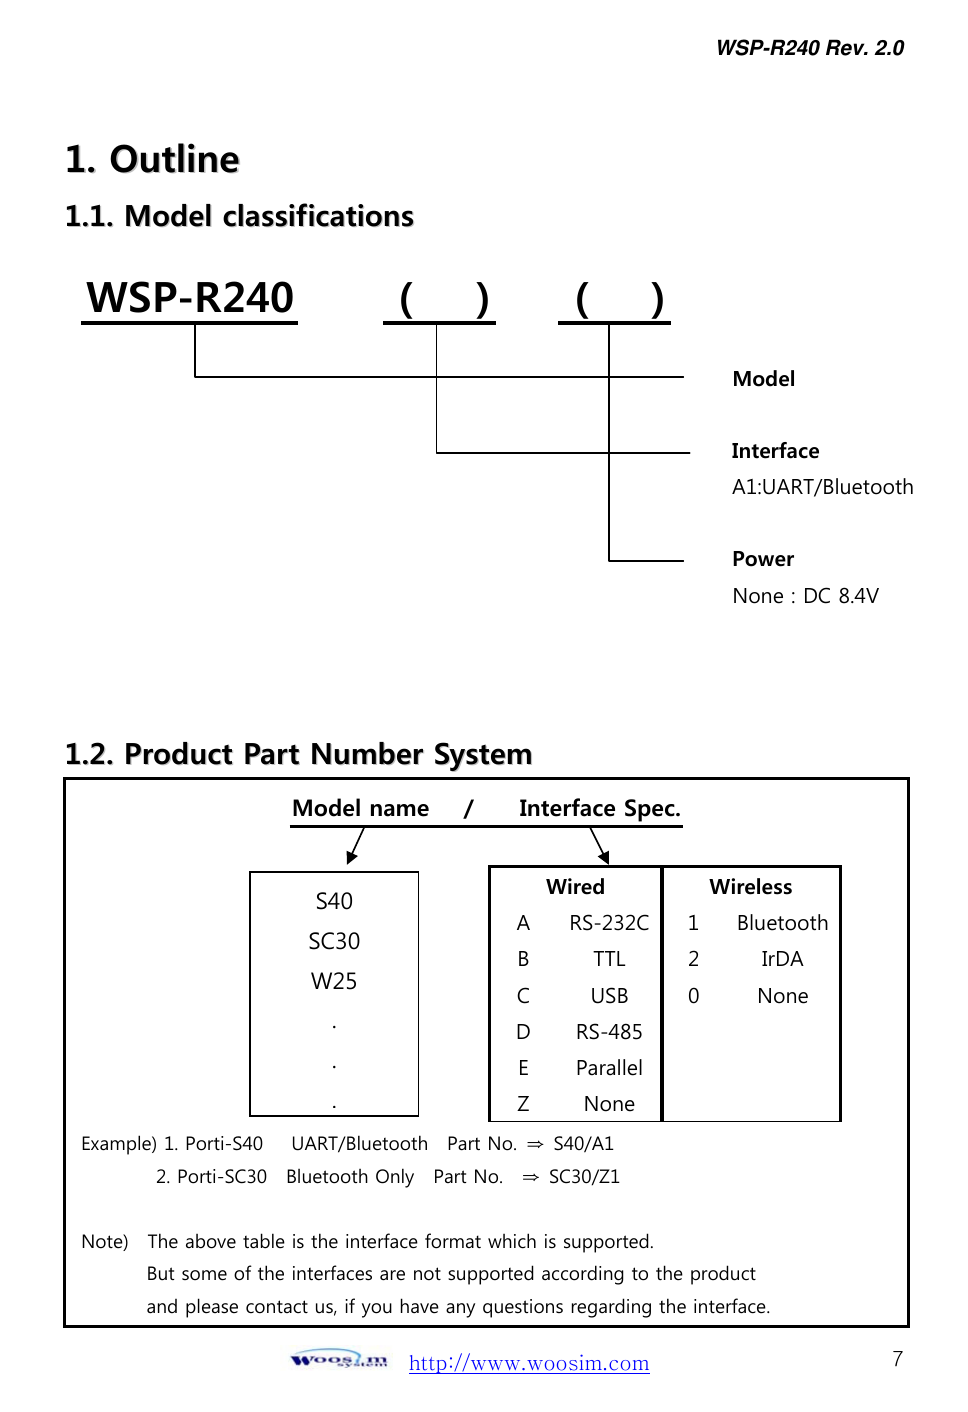 WSP-R240 Rev. 2.0     http://www.woosim.com 711..  OOuuttlliinnee  11..11..  MMooddeell  ccllaassssiiffiiccaattiioonnss               11..22..  PPrroodduucctt  PPaarrtt  NNuummbbeerr  SSyysstteemm               WSP-R240          (      )    (   )        Model   Interface A1:UART/Bluetooth        Power                                                                 None : DC 8.4V  Model name   /    Interface Spec.         Example) 1. Porti-S40   UART/Bluetooth  Part No. ⇒ S40/A1         2. Porti-SC30  Bluetooth Only  Part No.  ⇒ SC30/Z1  Note)    The above table is the interface format which is supported. But some of the interfaces are not supported according to the product and please contact us, if you have any questions regarding the interface. S40 SC30 W25 . . .Wired  Wireless A  RS-232C 1  Bluetooth B  TTL  2  IrDA C  USB  0  None D  RS-485    E  Parallel    Z  None     